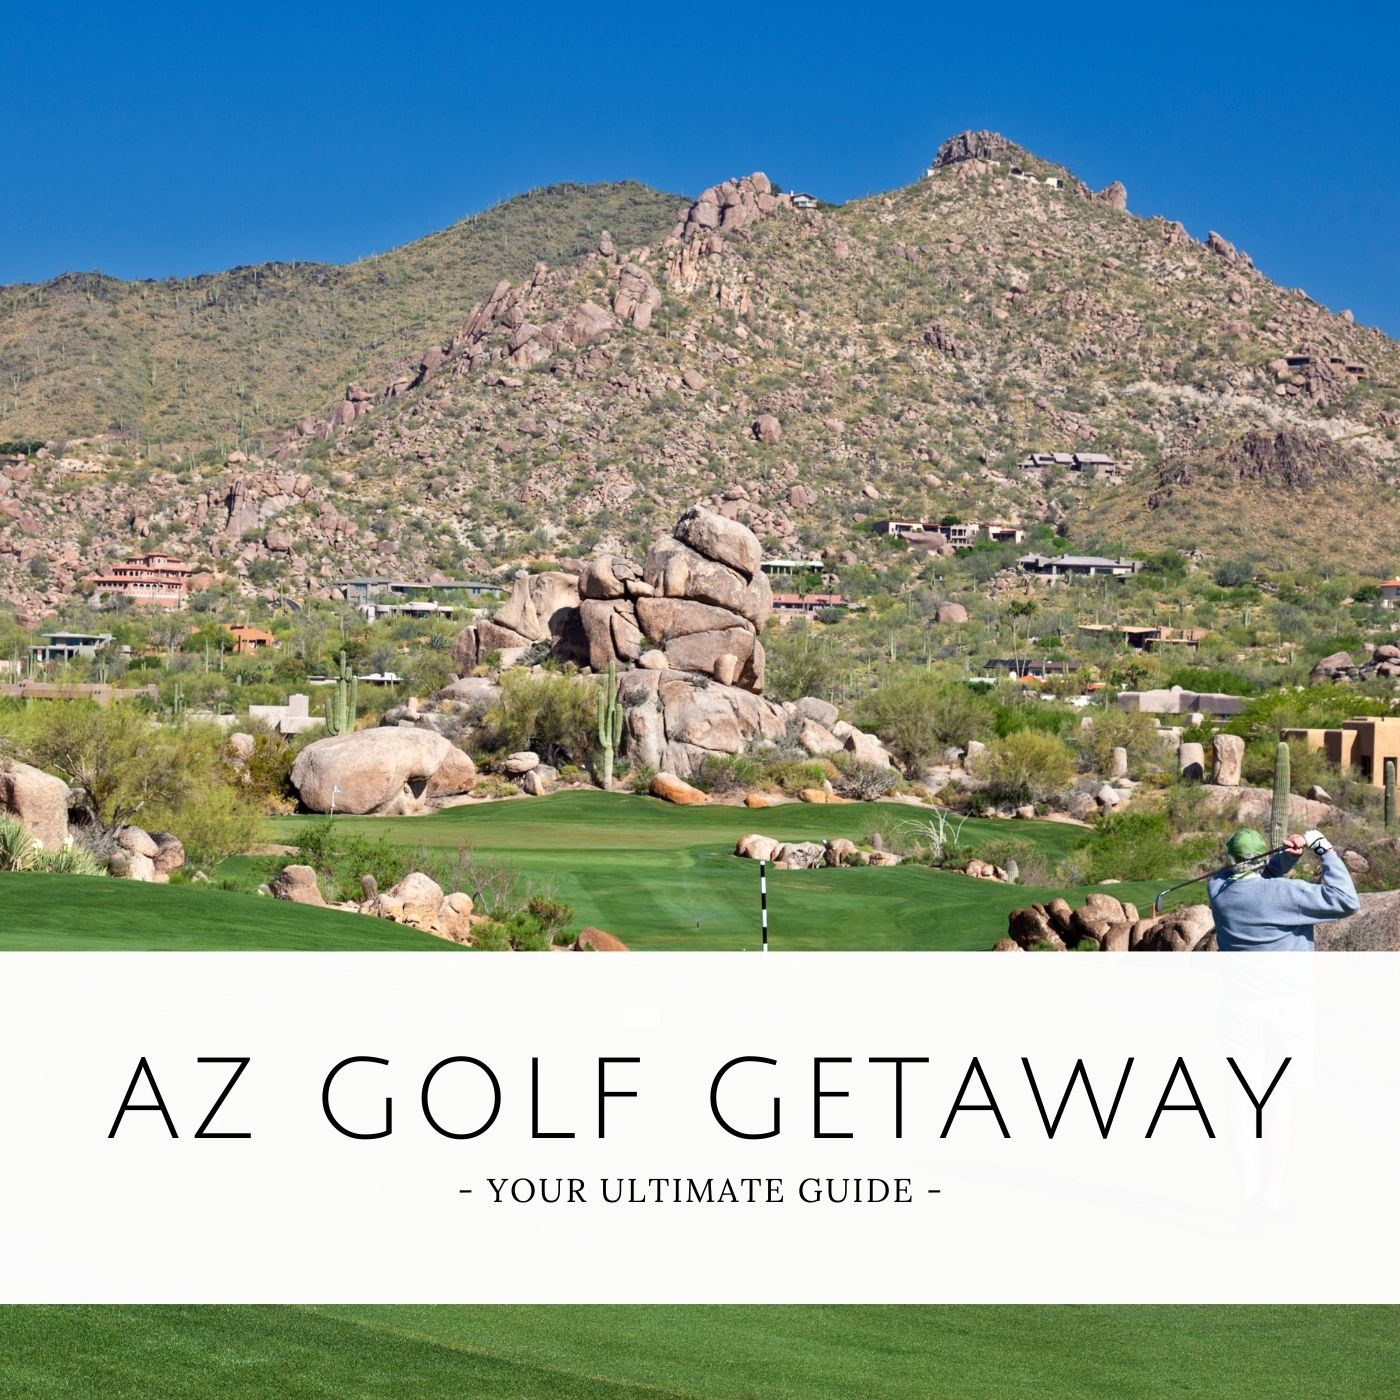 The Ultimate Guide to Planning a Golf Getaway in Arizona